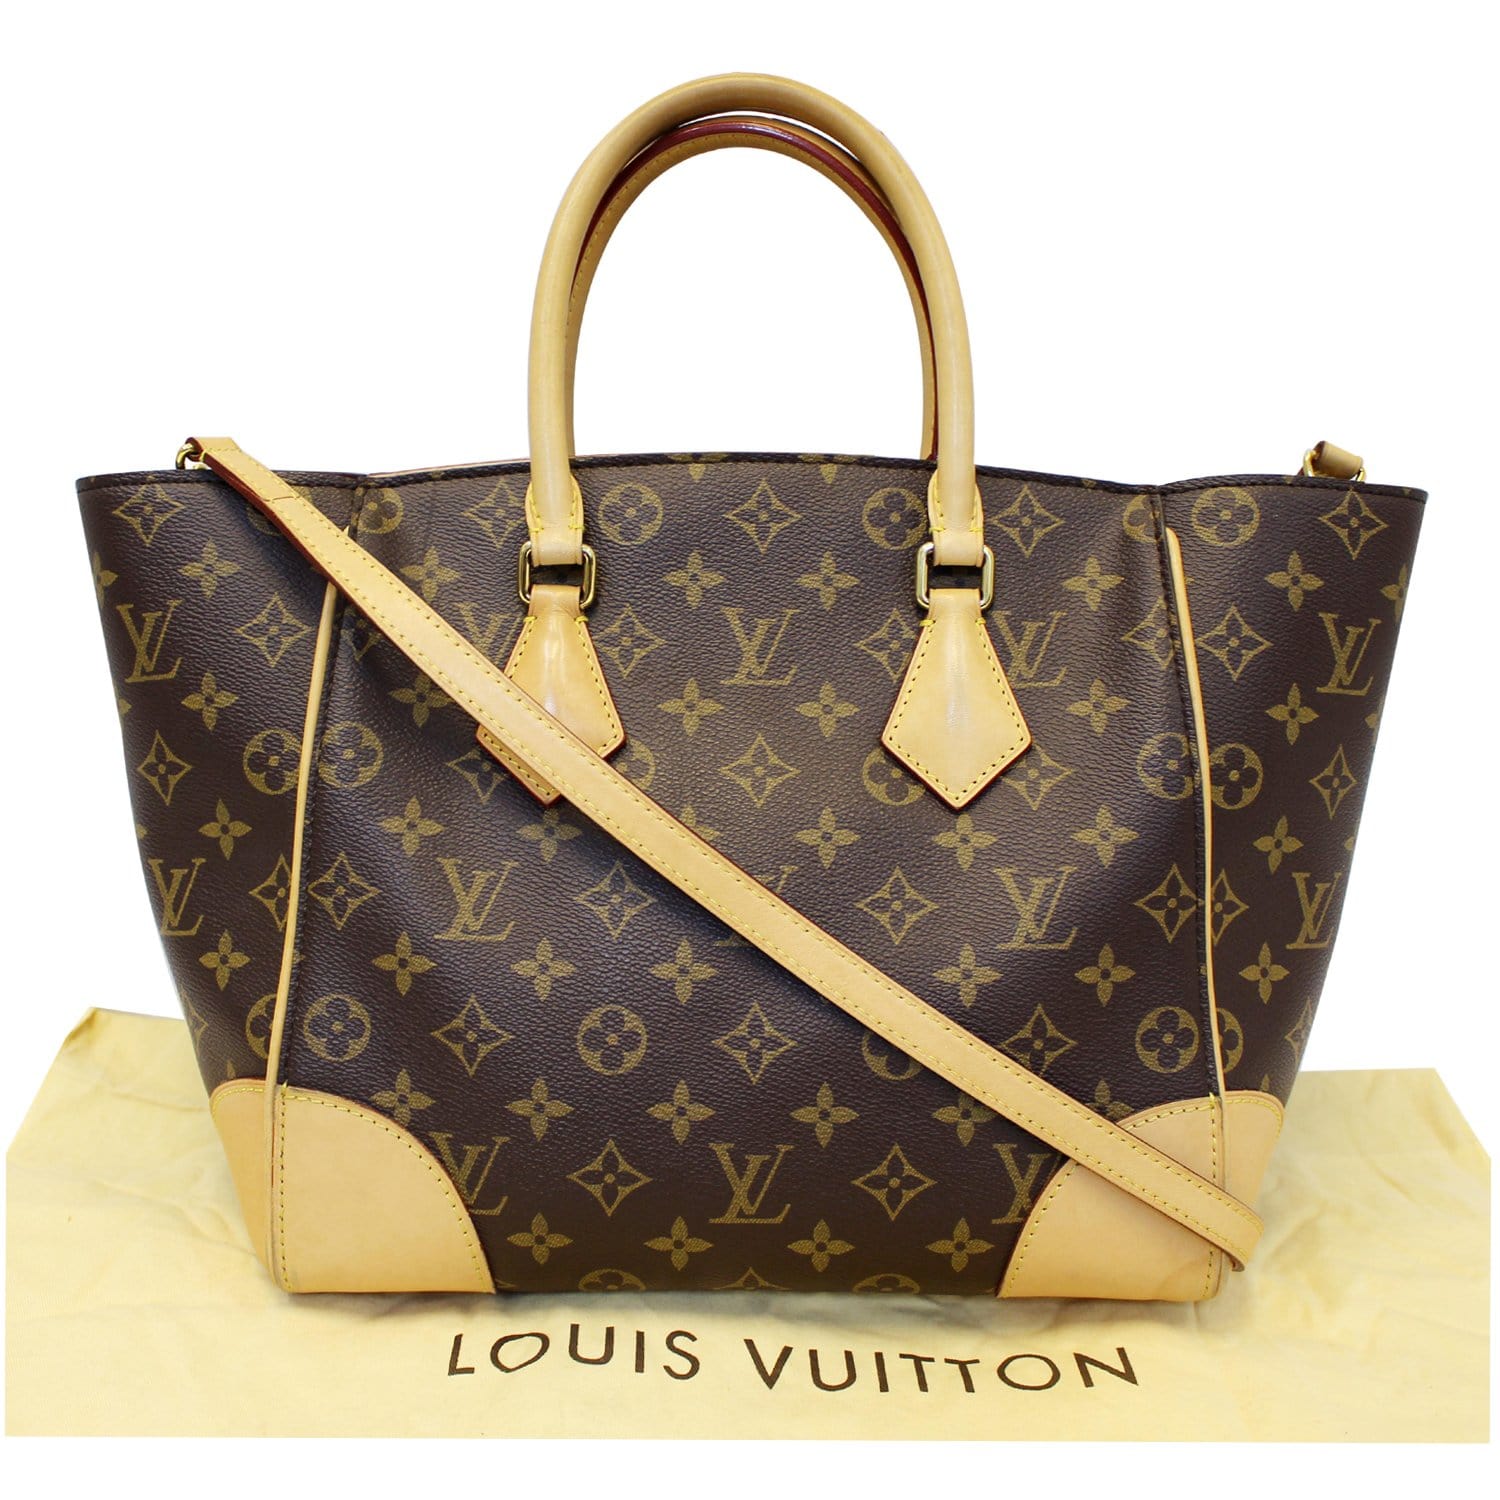 Perfect for every day. The Louis Vuitton Phenix. #designerbag